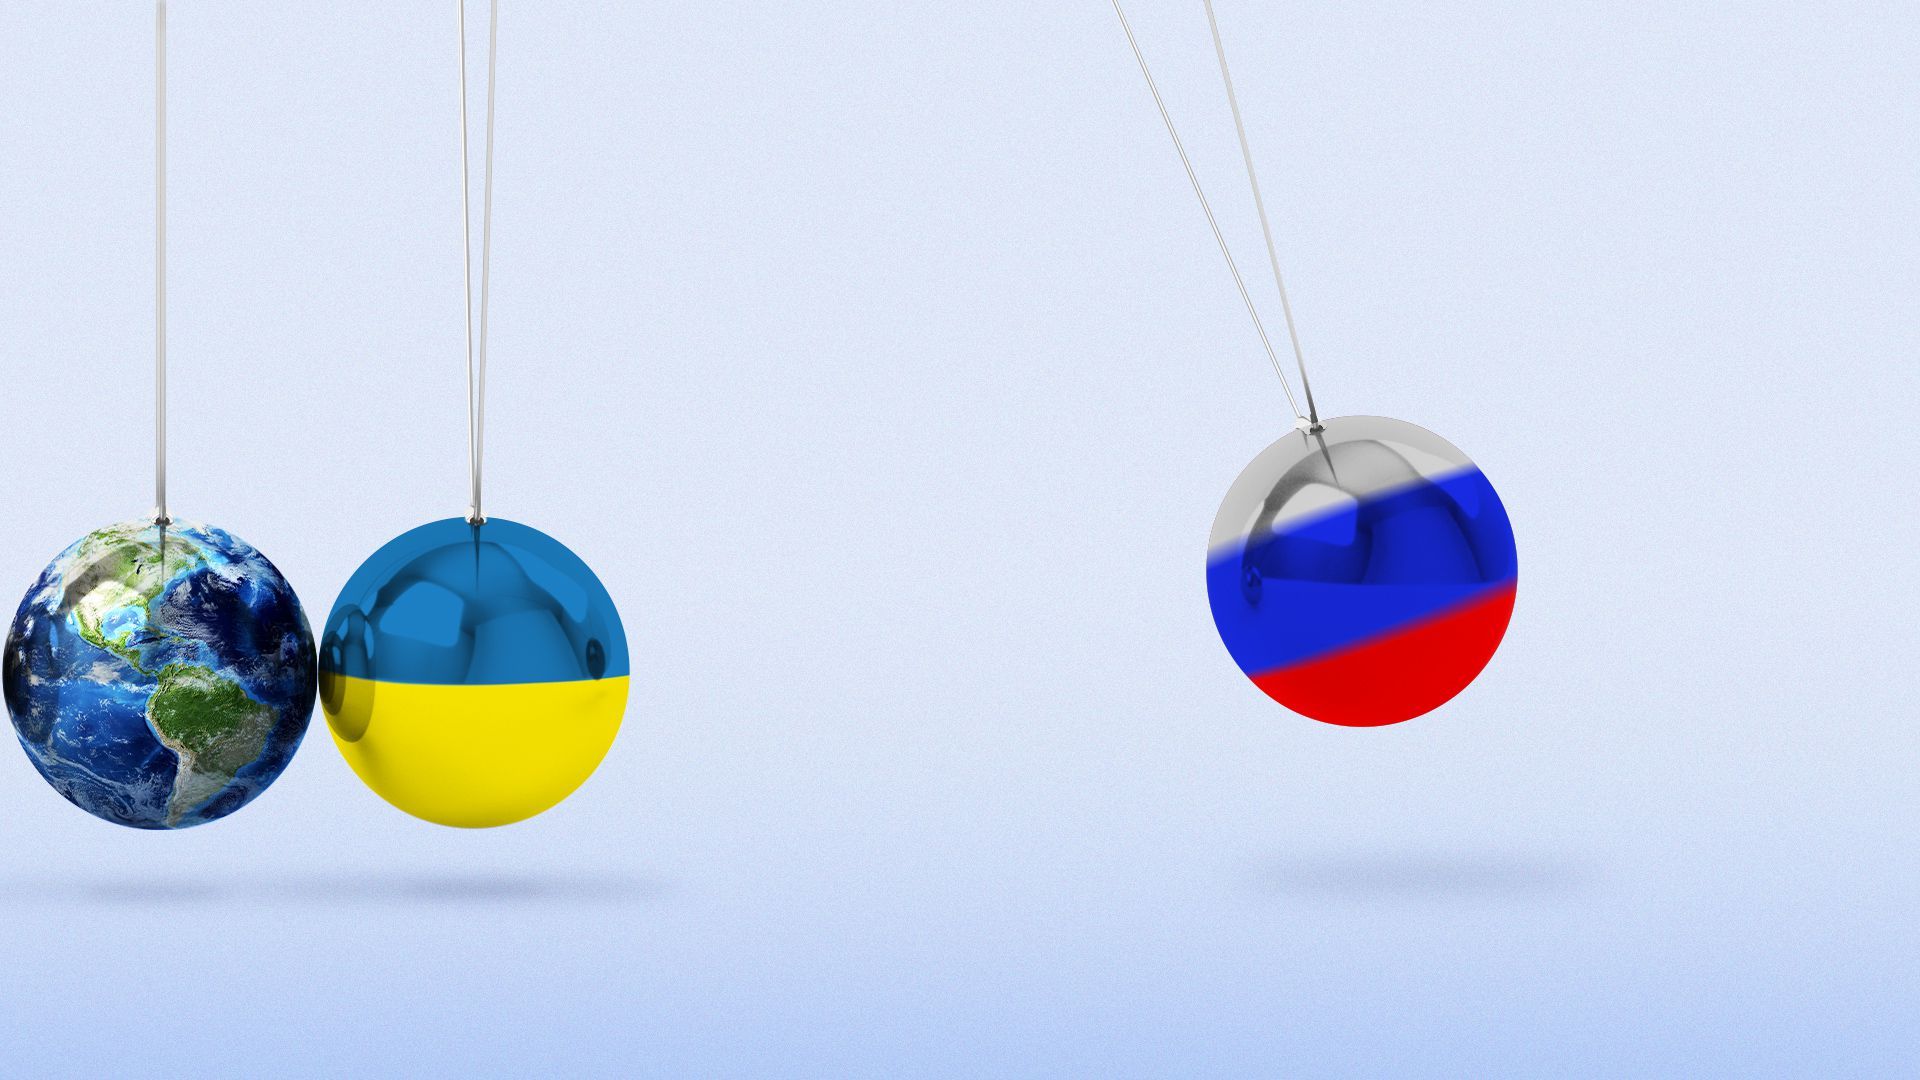 Illustration of a Newton's cradle whose middle ball looks like the Ukrainian flag and it's sandwiched between the active ball, with a Russian flag, and another still ball that looks like the earth.